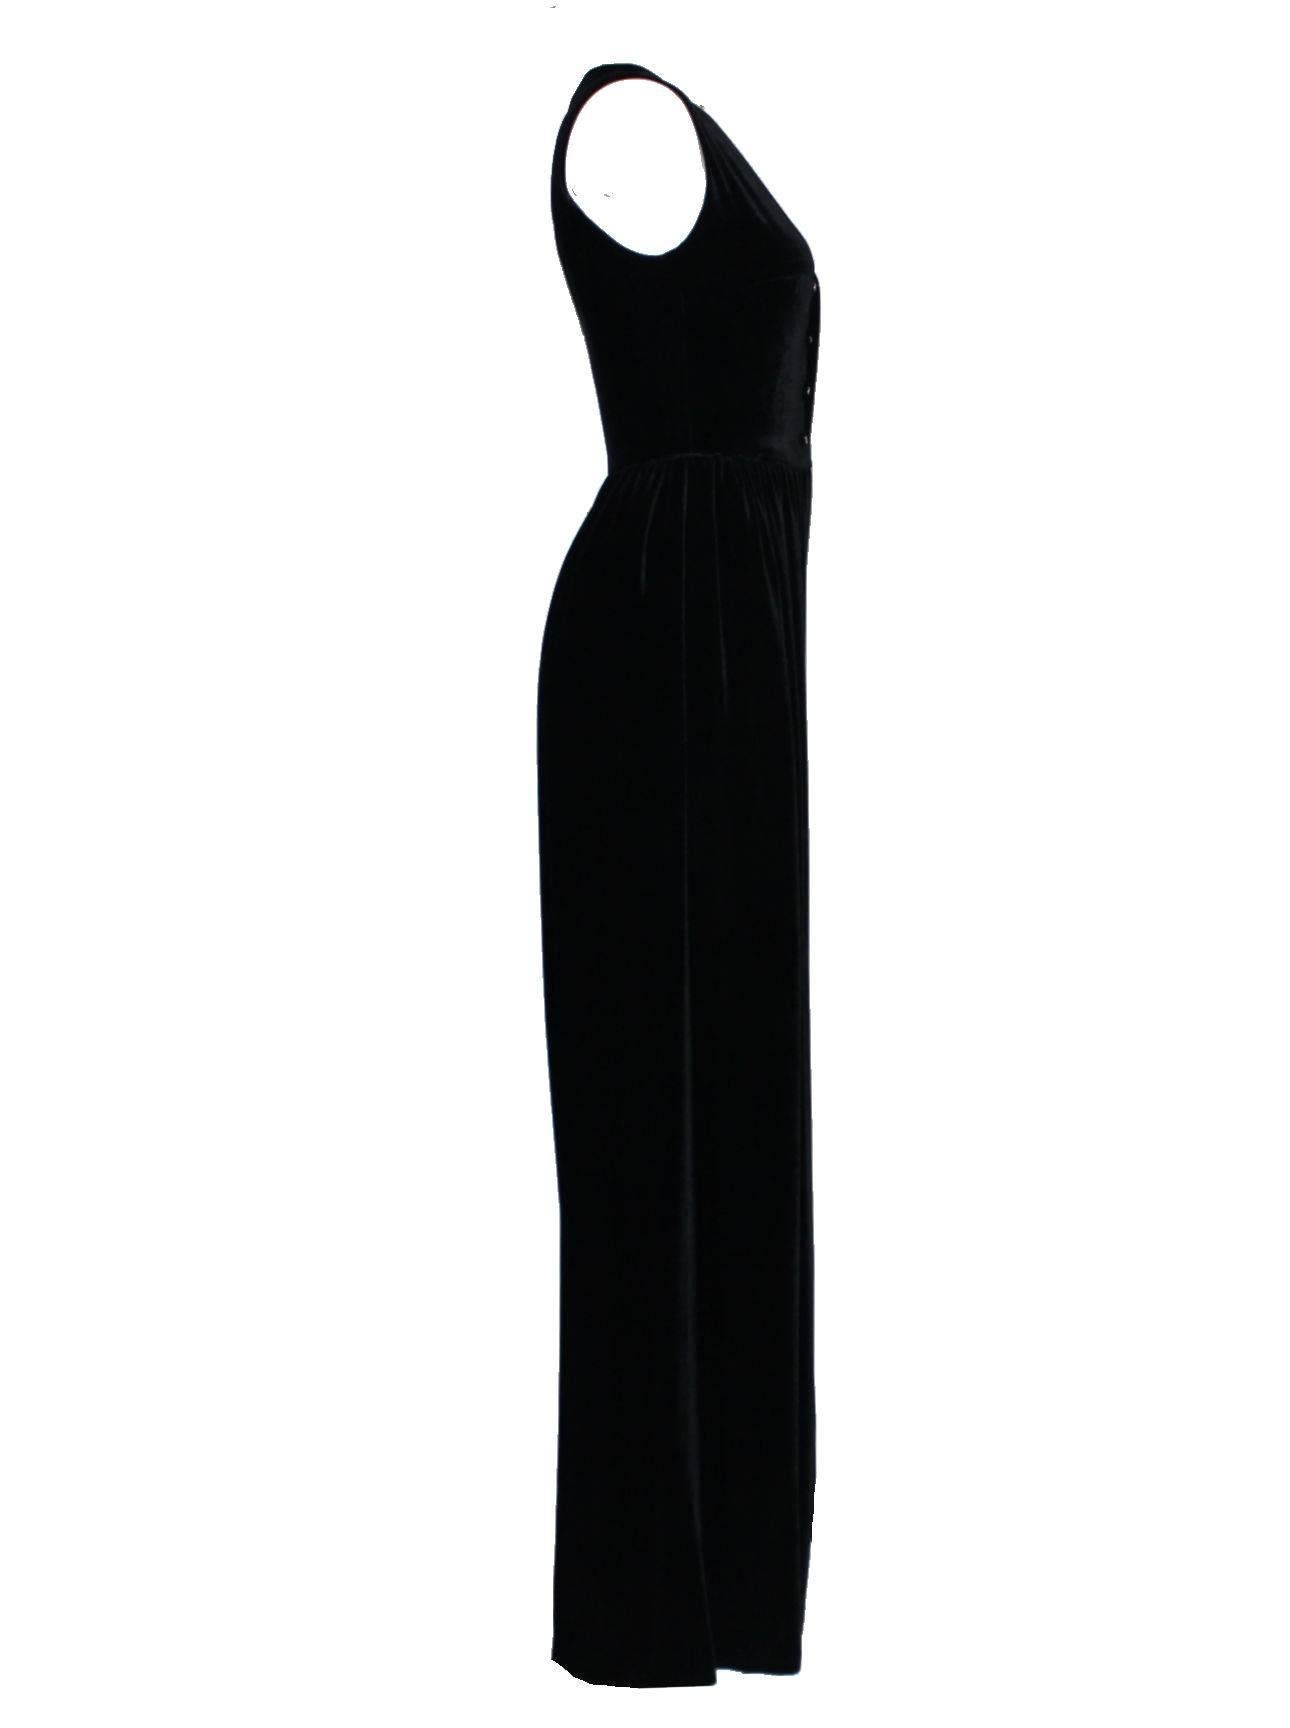 Amazing piece by Chanel
Softest black velvet fabric
Tight fitting upper part with wide palazzo style pant legs
Looks almost like a evening gown
Opens in front with the famous CC logo buttons
Perfect piece, very versatile
The costume jewelry is not